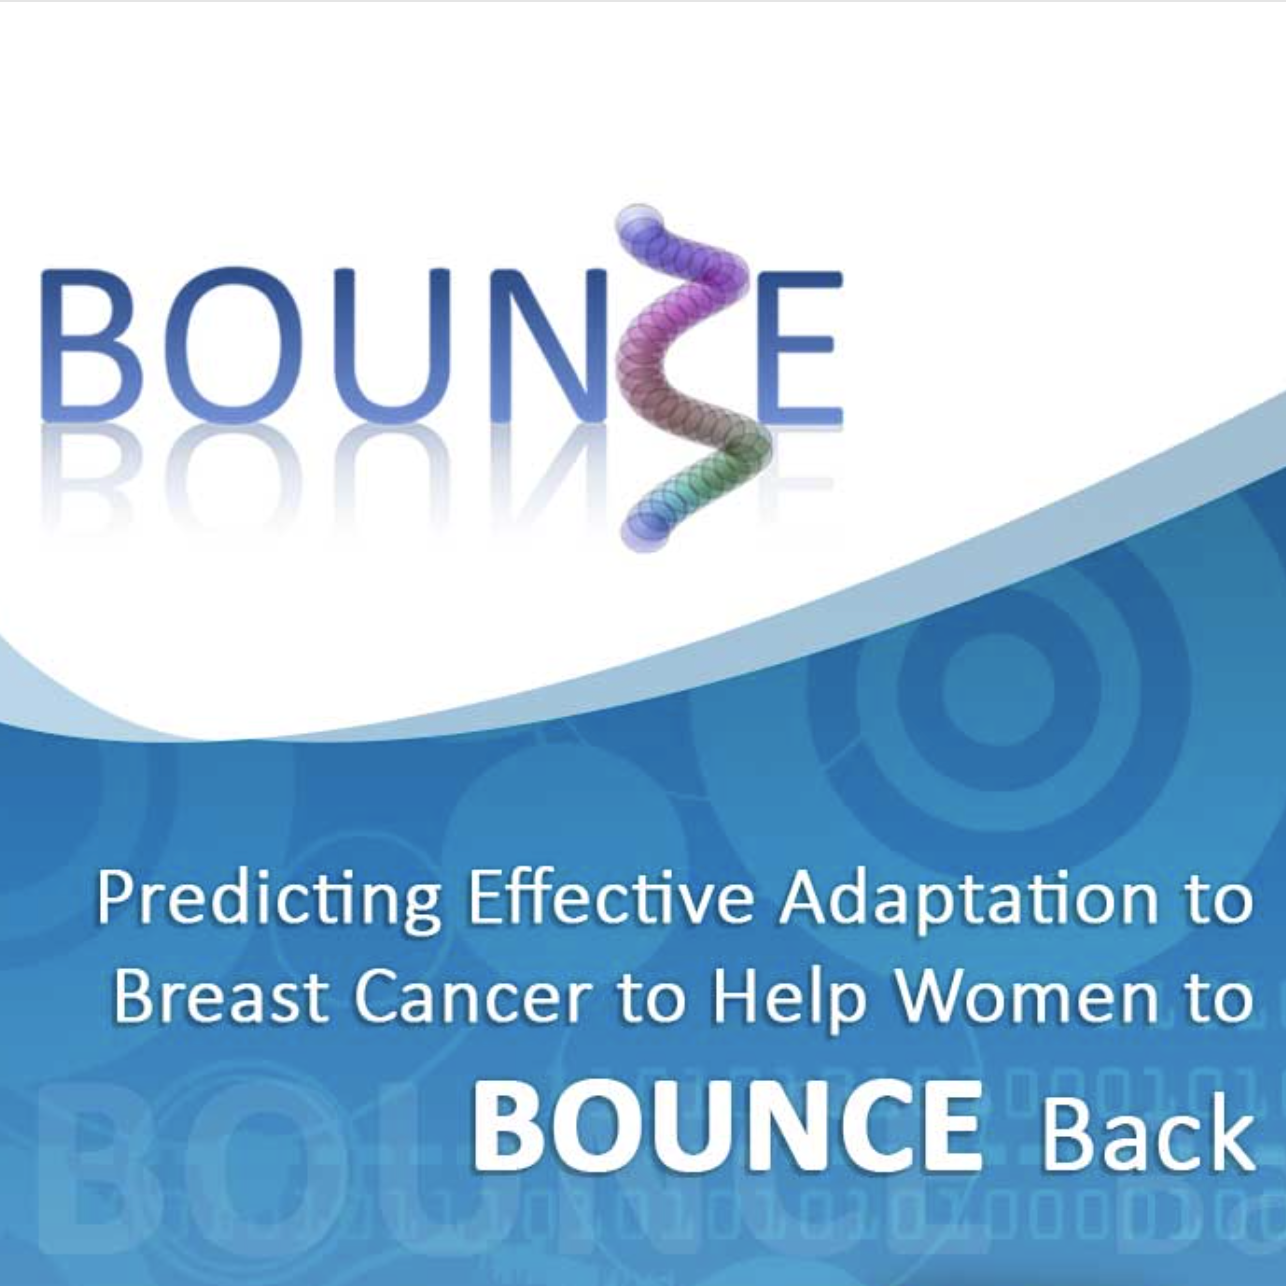 The BOUNCE Project: let’s talk about the resilience of women living with breast cancer